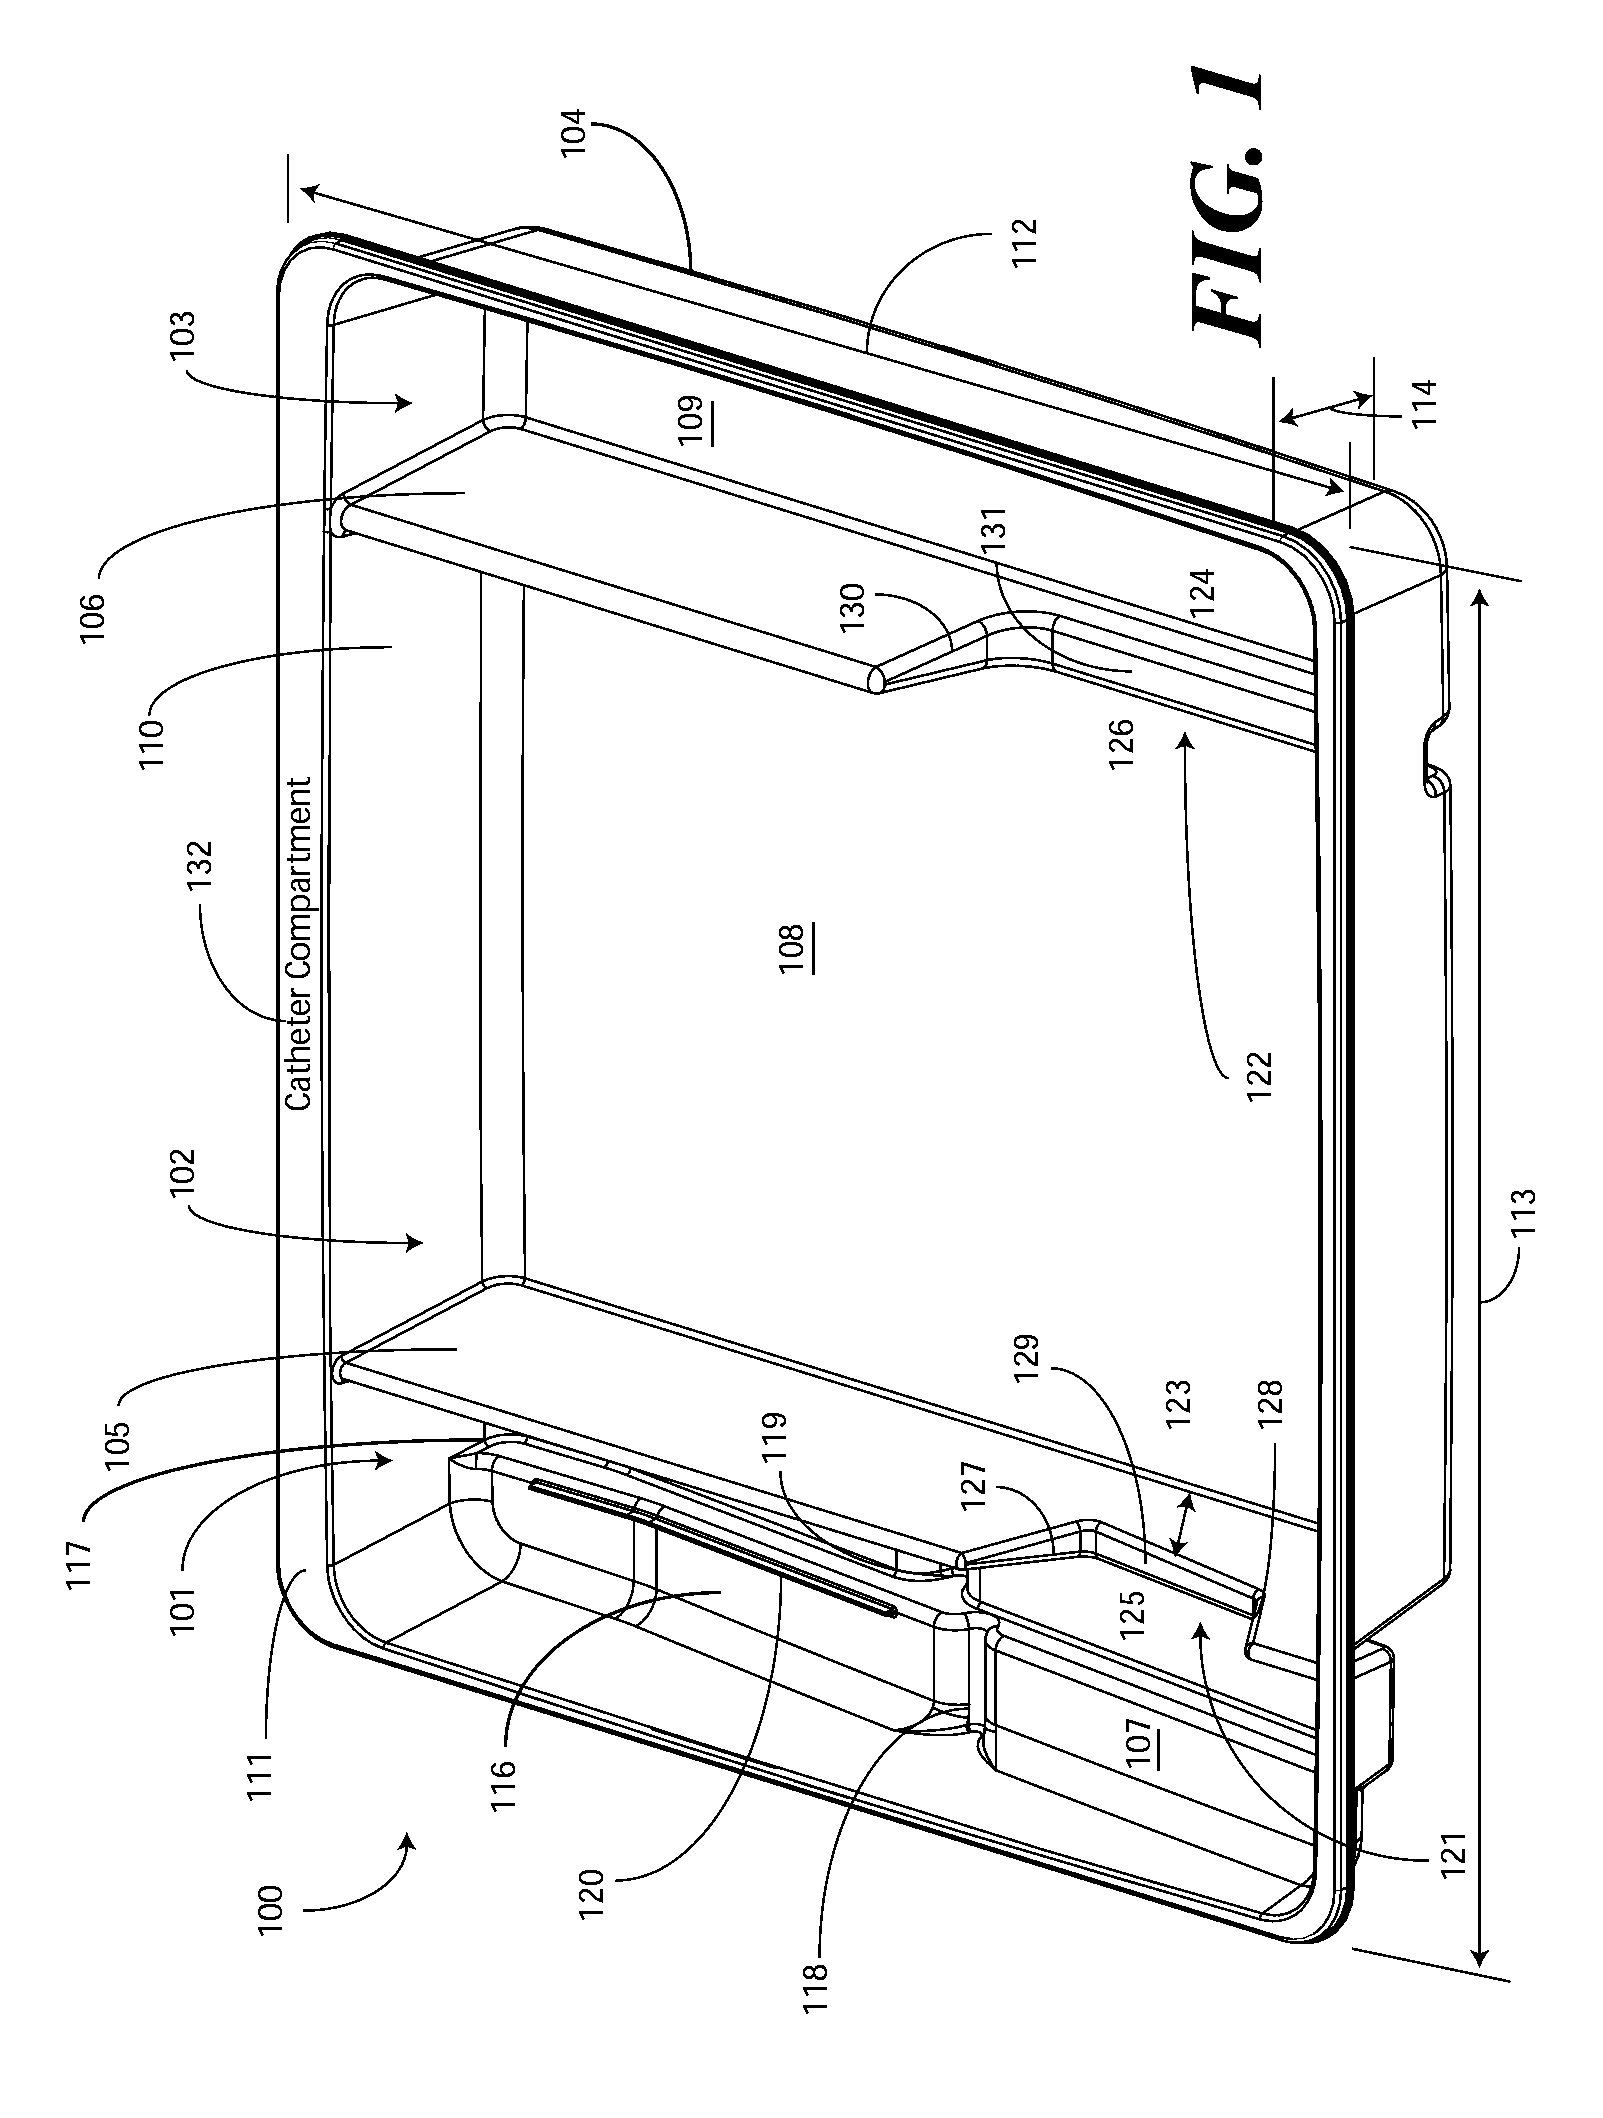 Catheter tray, packaging system, instruction insert, and associated methods